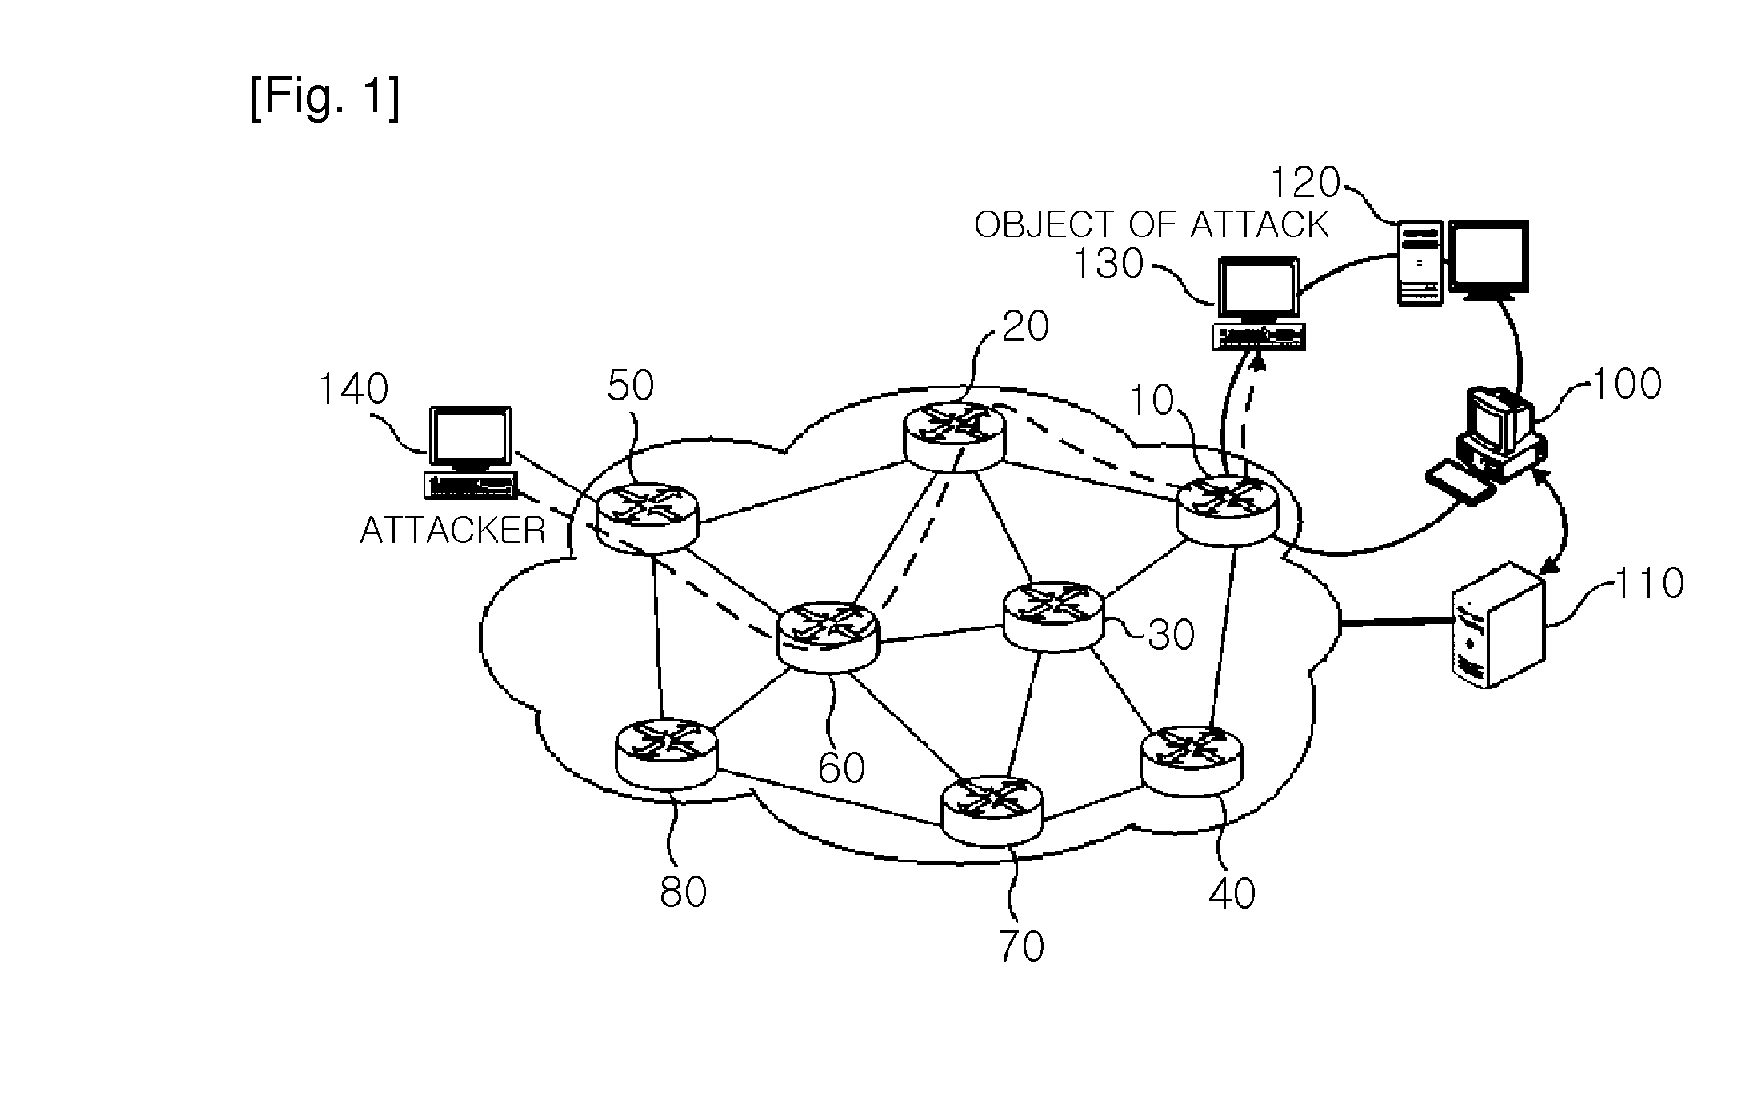 Log-based traceback system and method using centroid decomposition technique